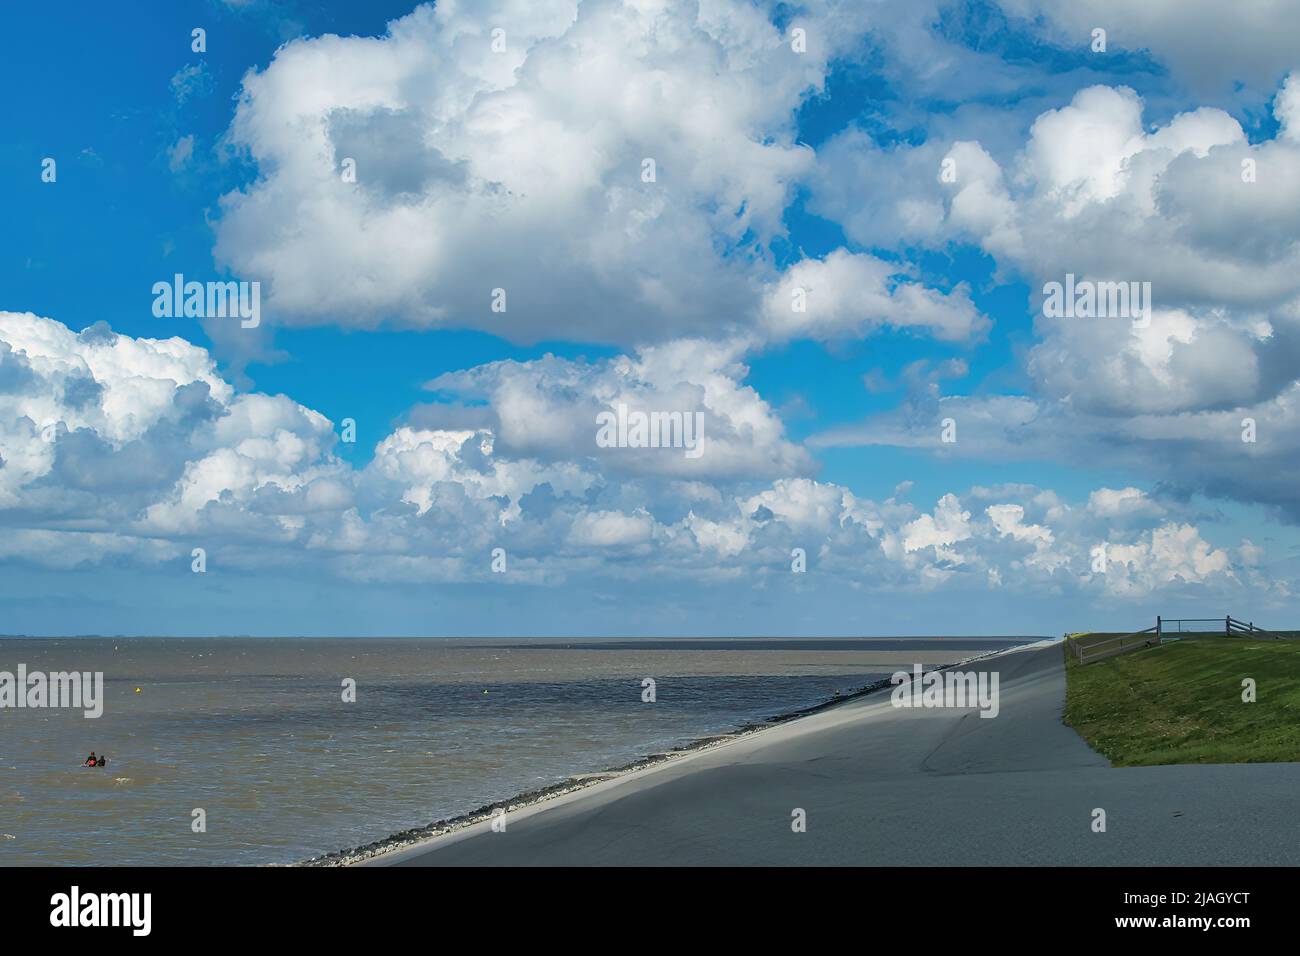 The sea dyke near Lauwersoog on the Wadden Sea, province of Groningen, in the north of the Netherlands. Cloudscape. Stock Photo